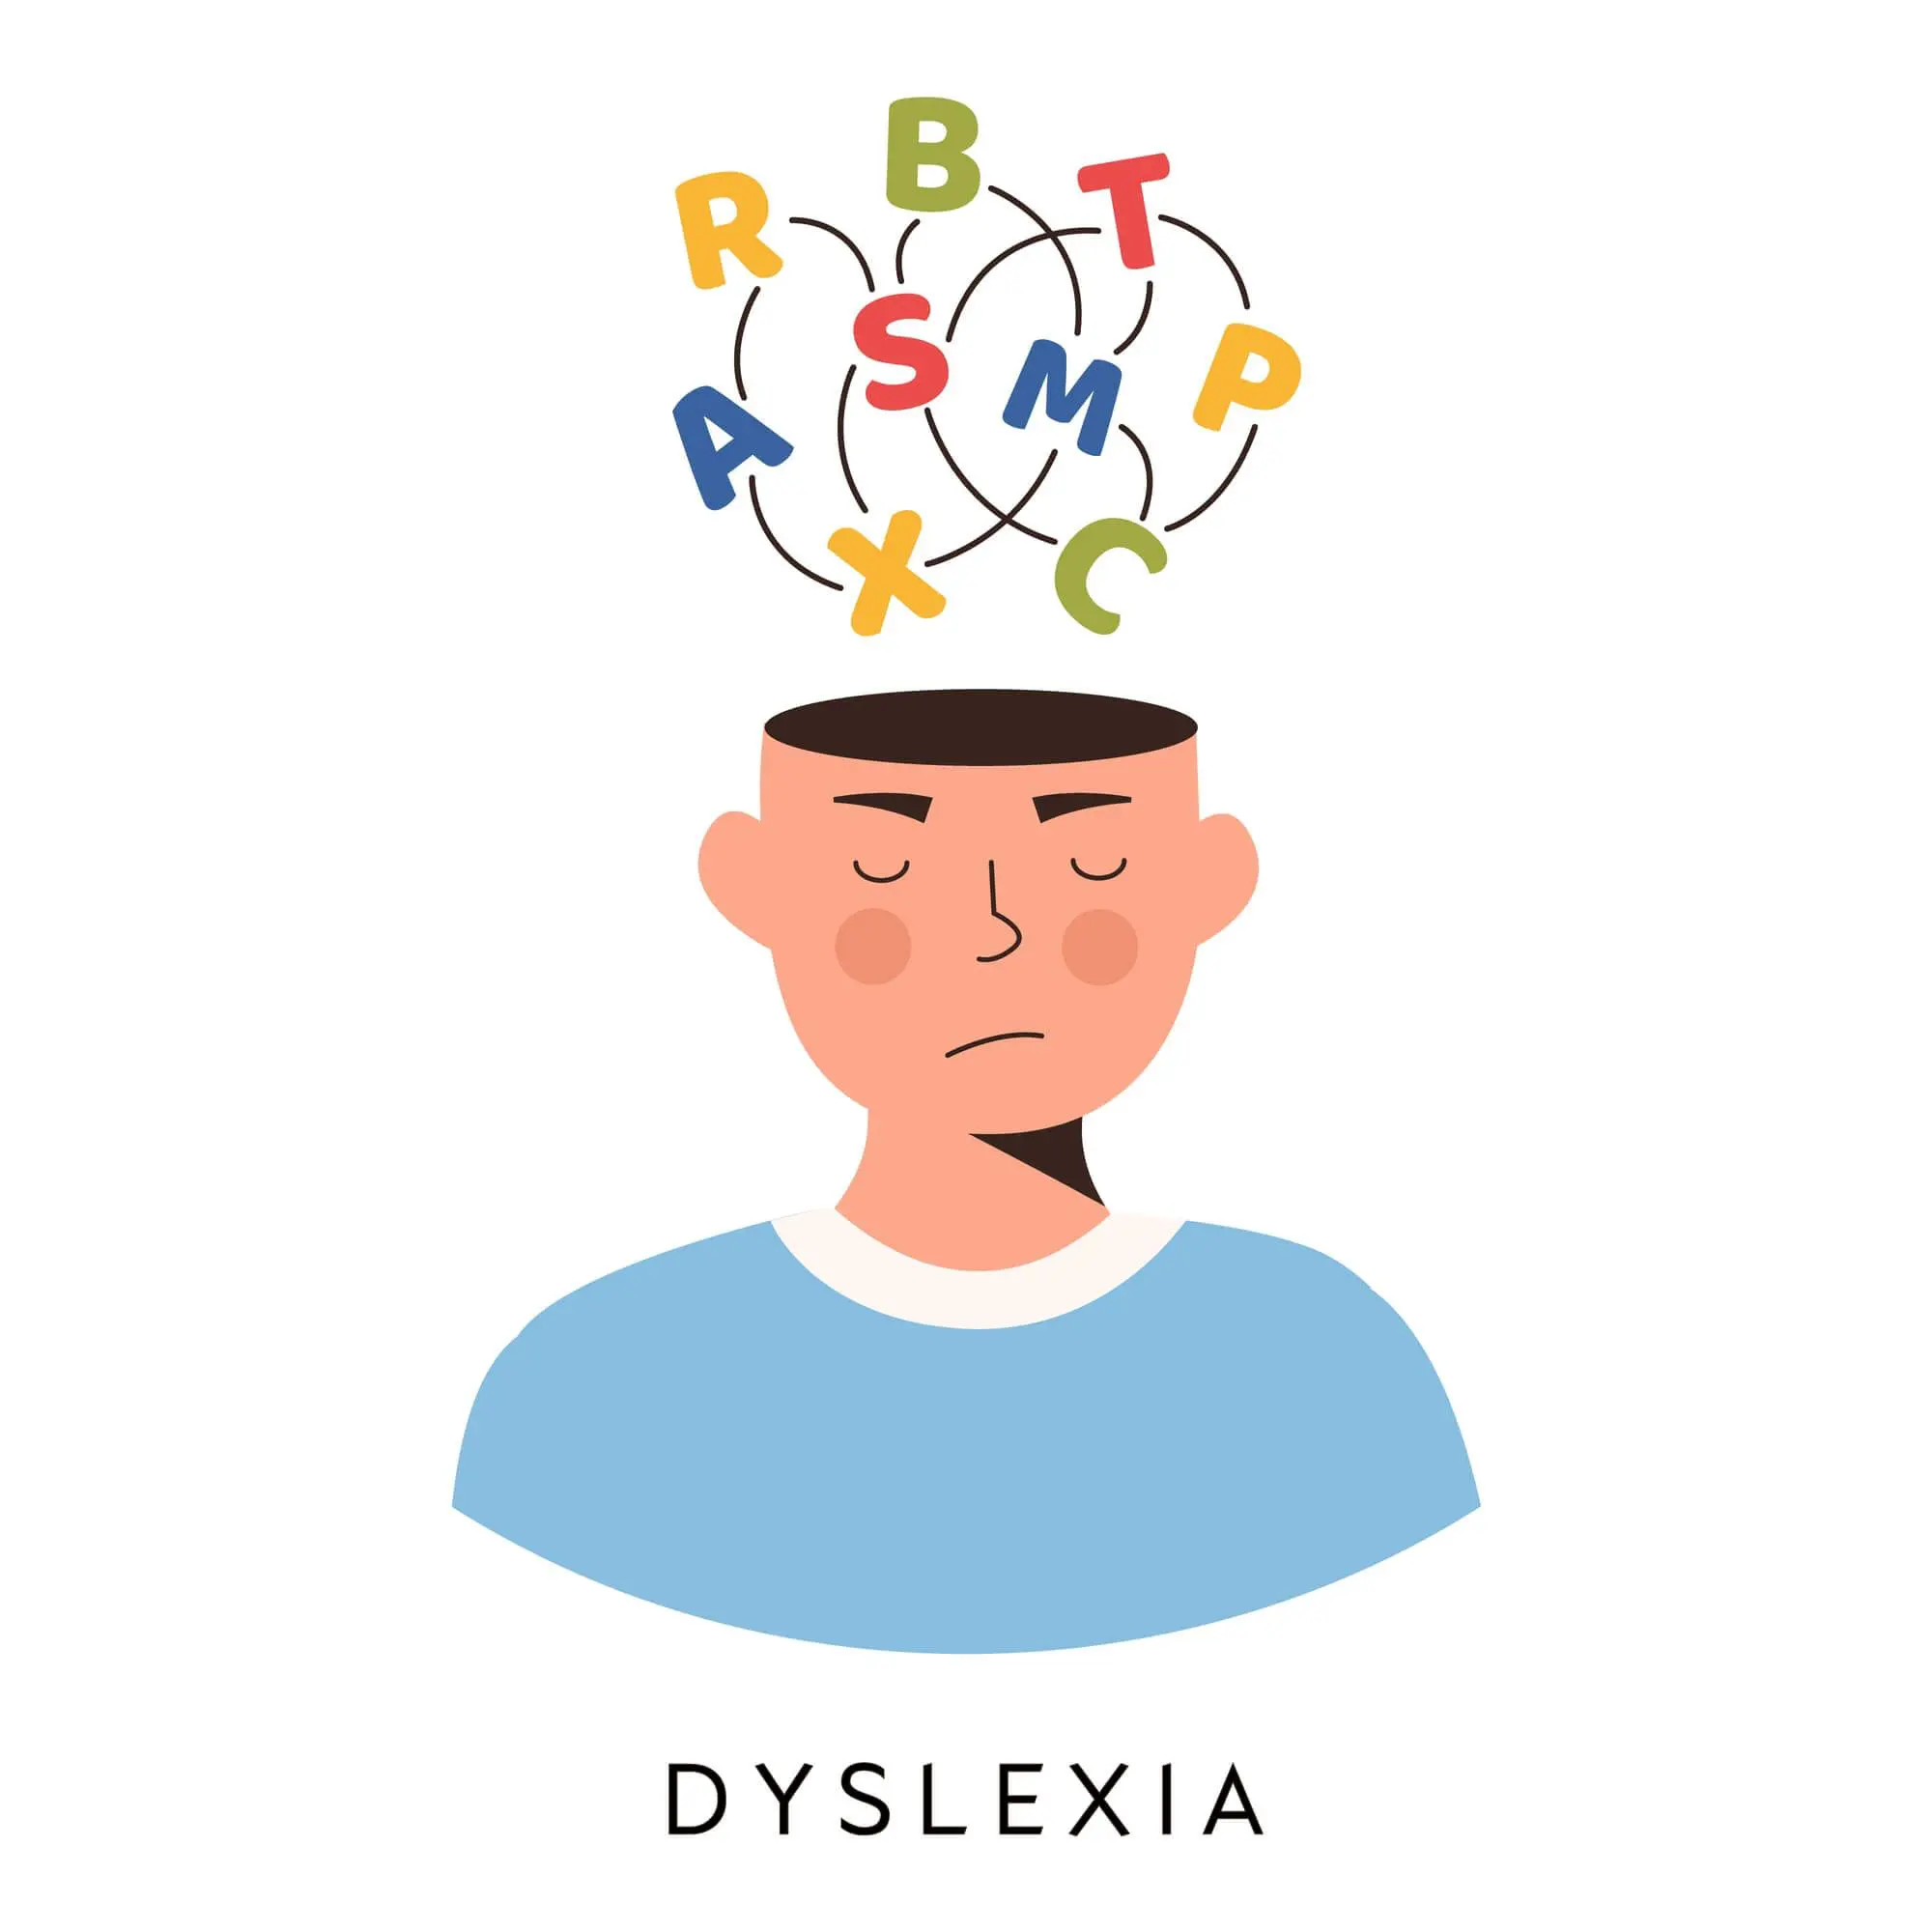 Dyslexia can jumble up words, leading to difficulty reading.